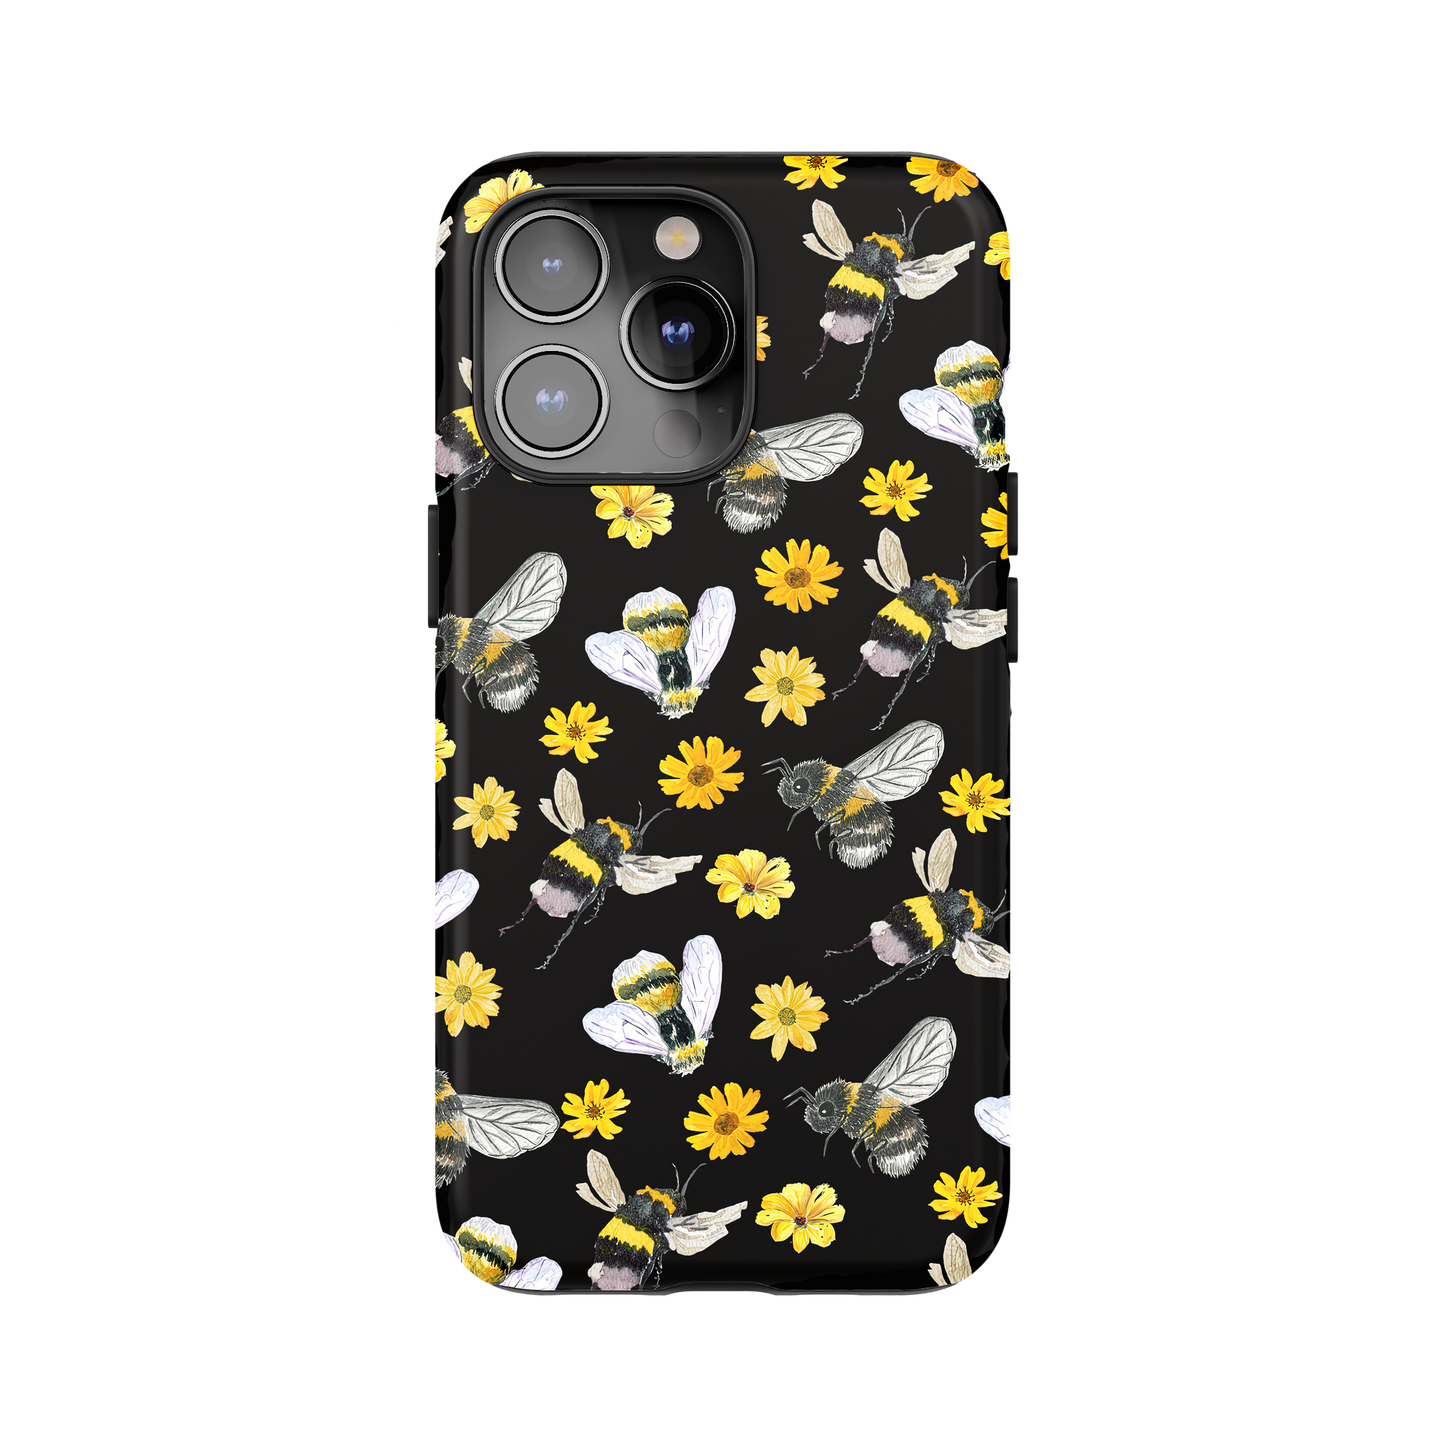 Bees Phone Case for iPhone and Samsung